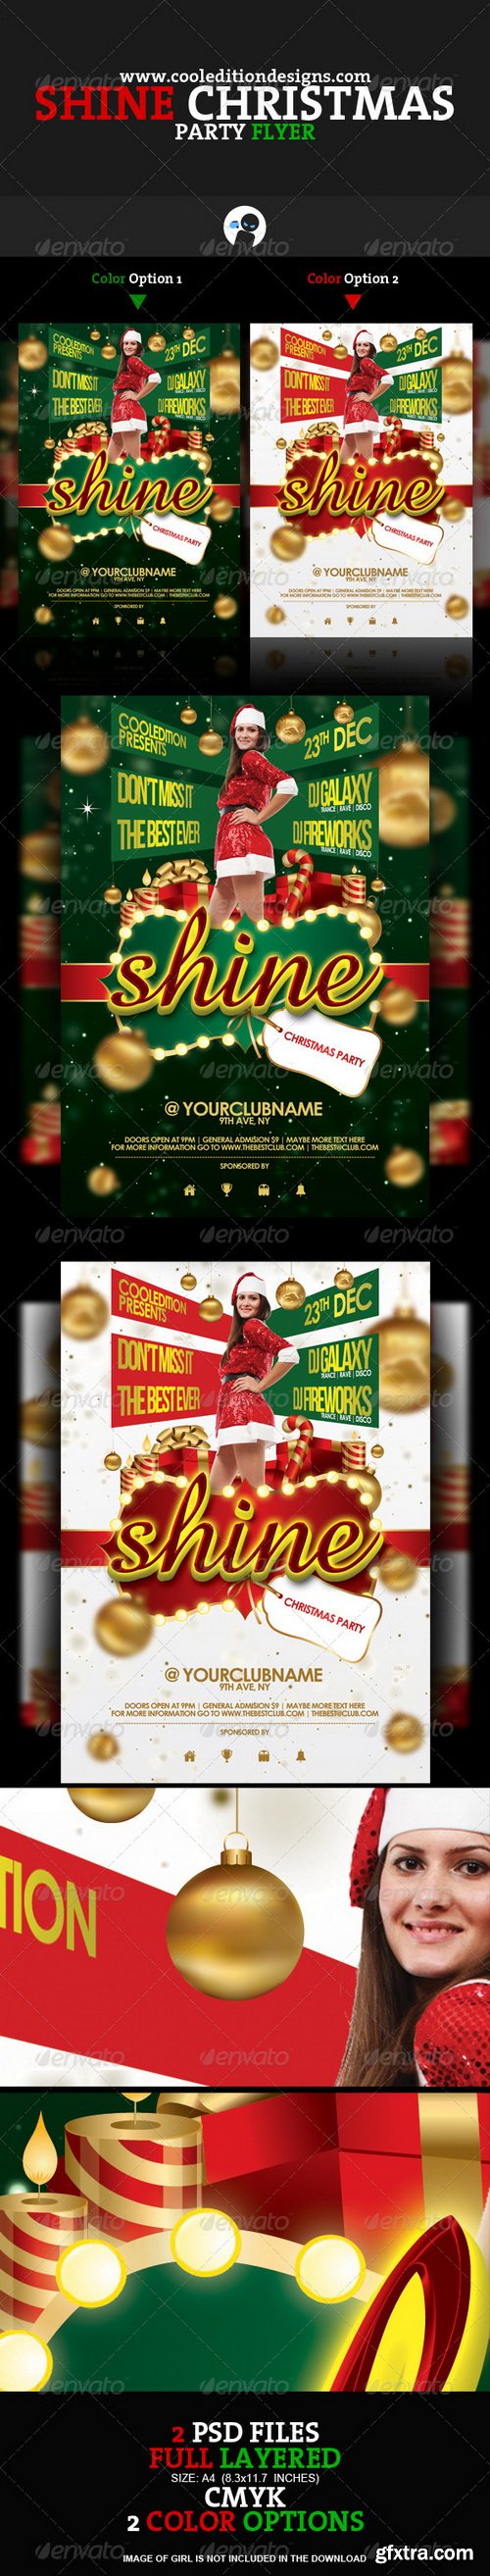 GraphicRiver - Shine Christmas Party Flyer 926892